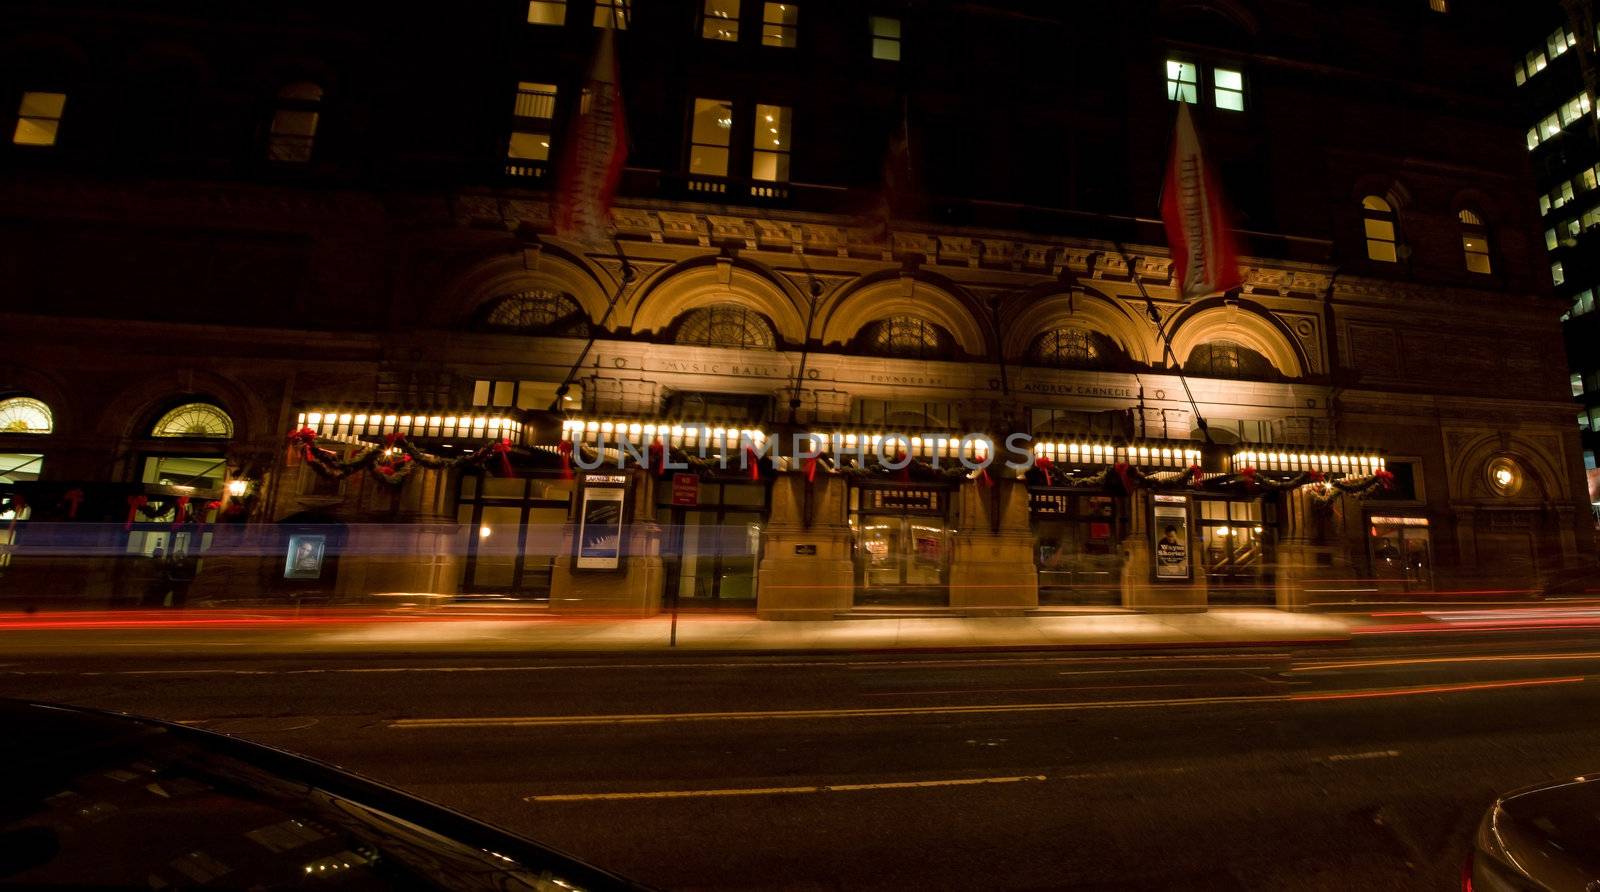 The famous Carnegie Hall, home of the New York Philharmonic Orchestra, by night at 57th street and 7th avenue